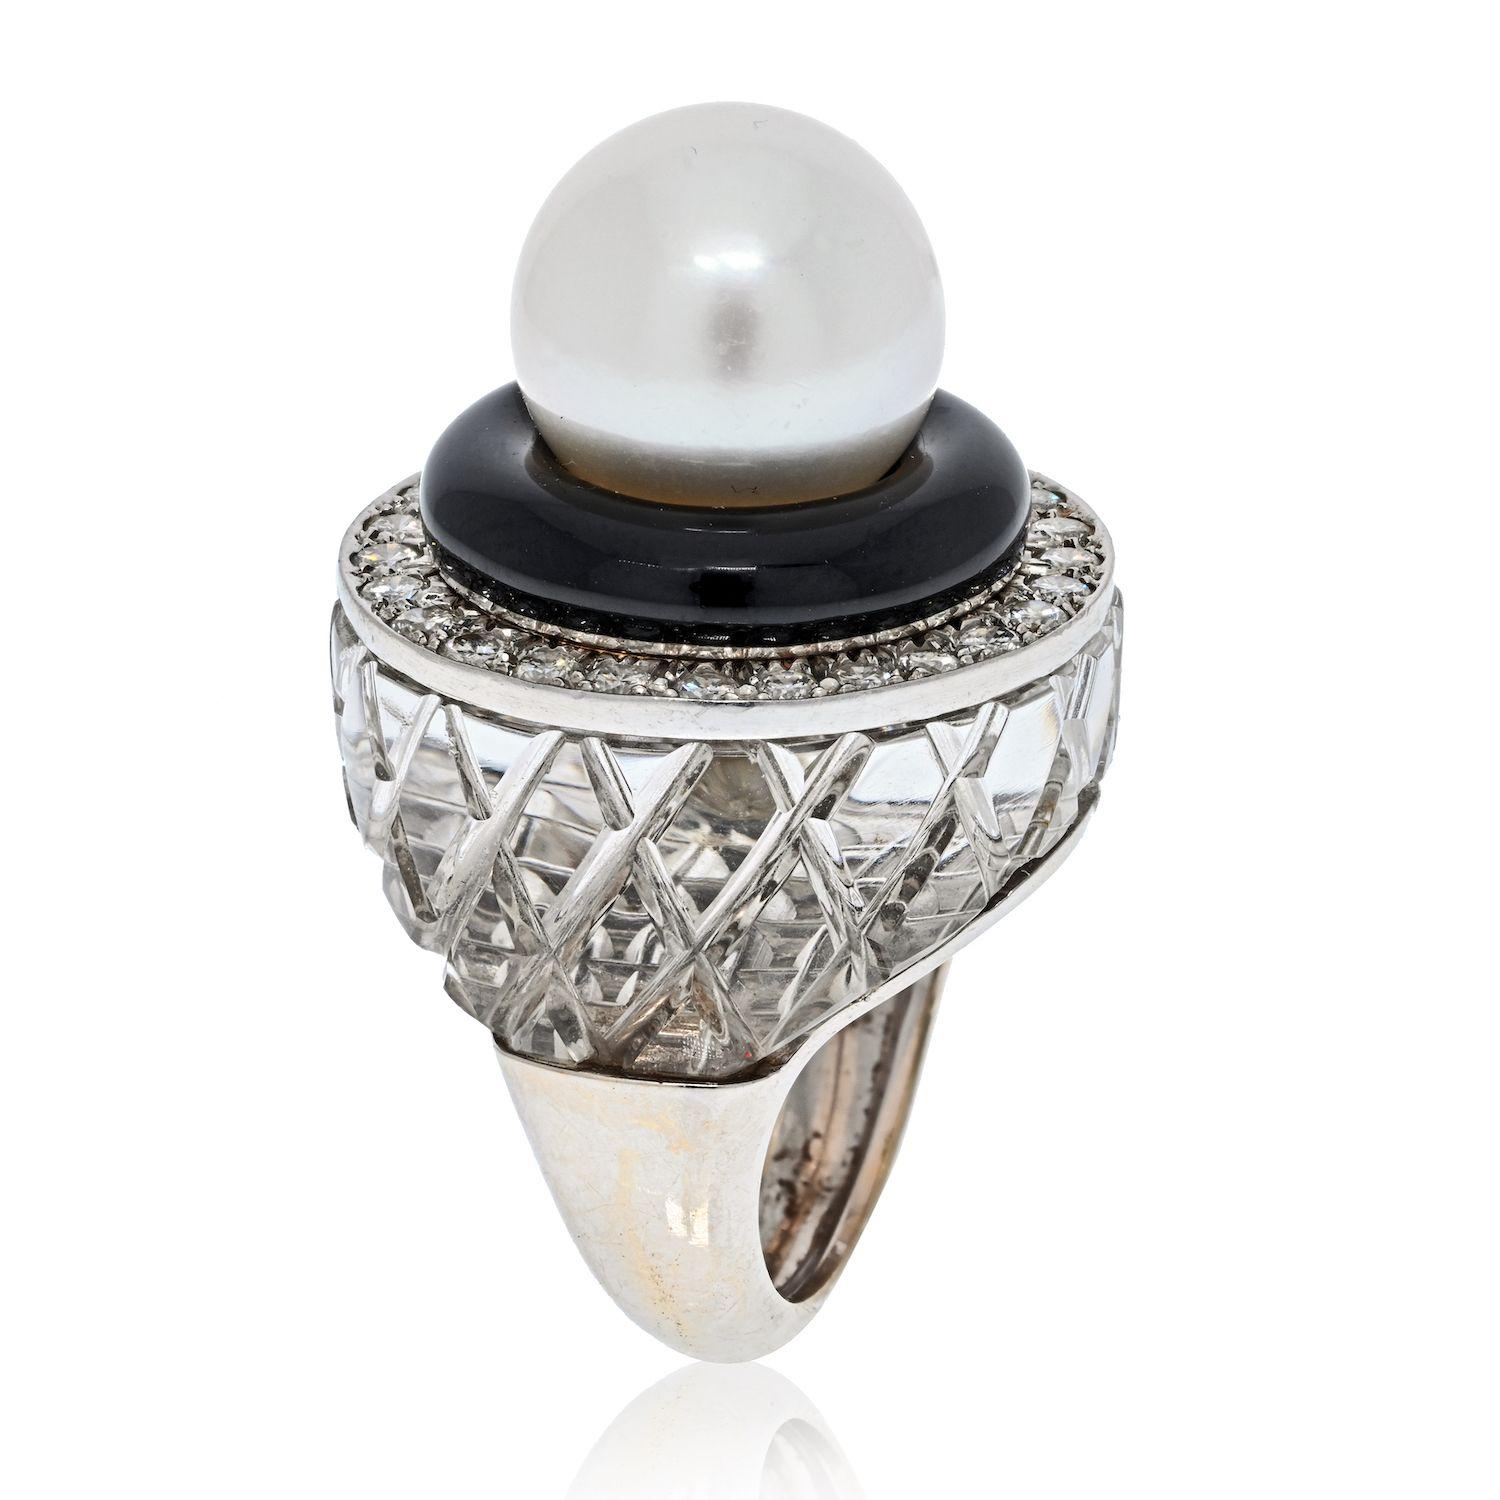 The cocktail ring was developed for the rebellious twenties flapper. Deliberately bold and eye-catching, it was designed to attract attention to the drink in her hand during prohibition. Presented here rock crystal pearl and diamond ring by David